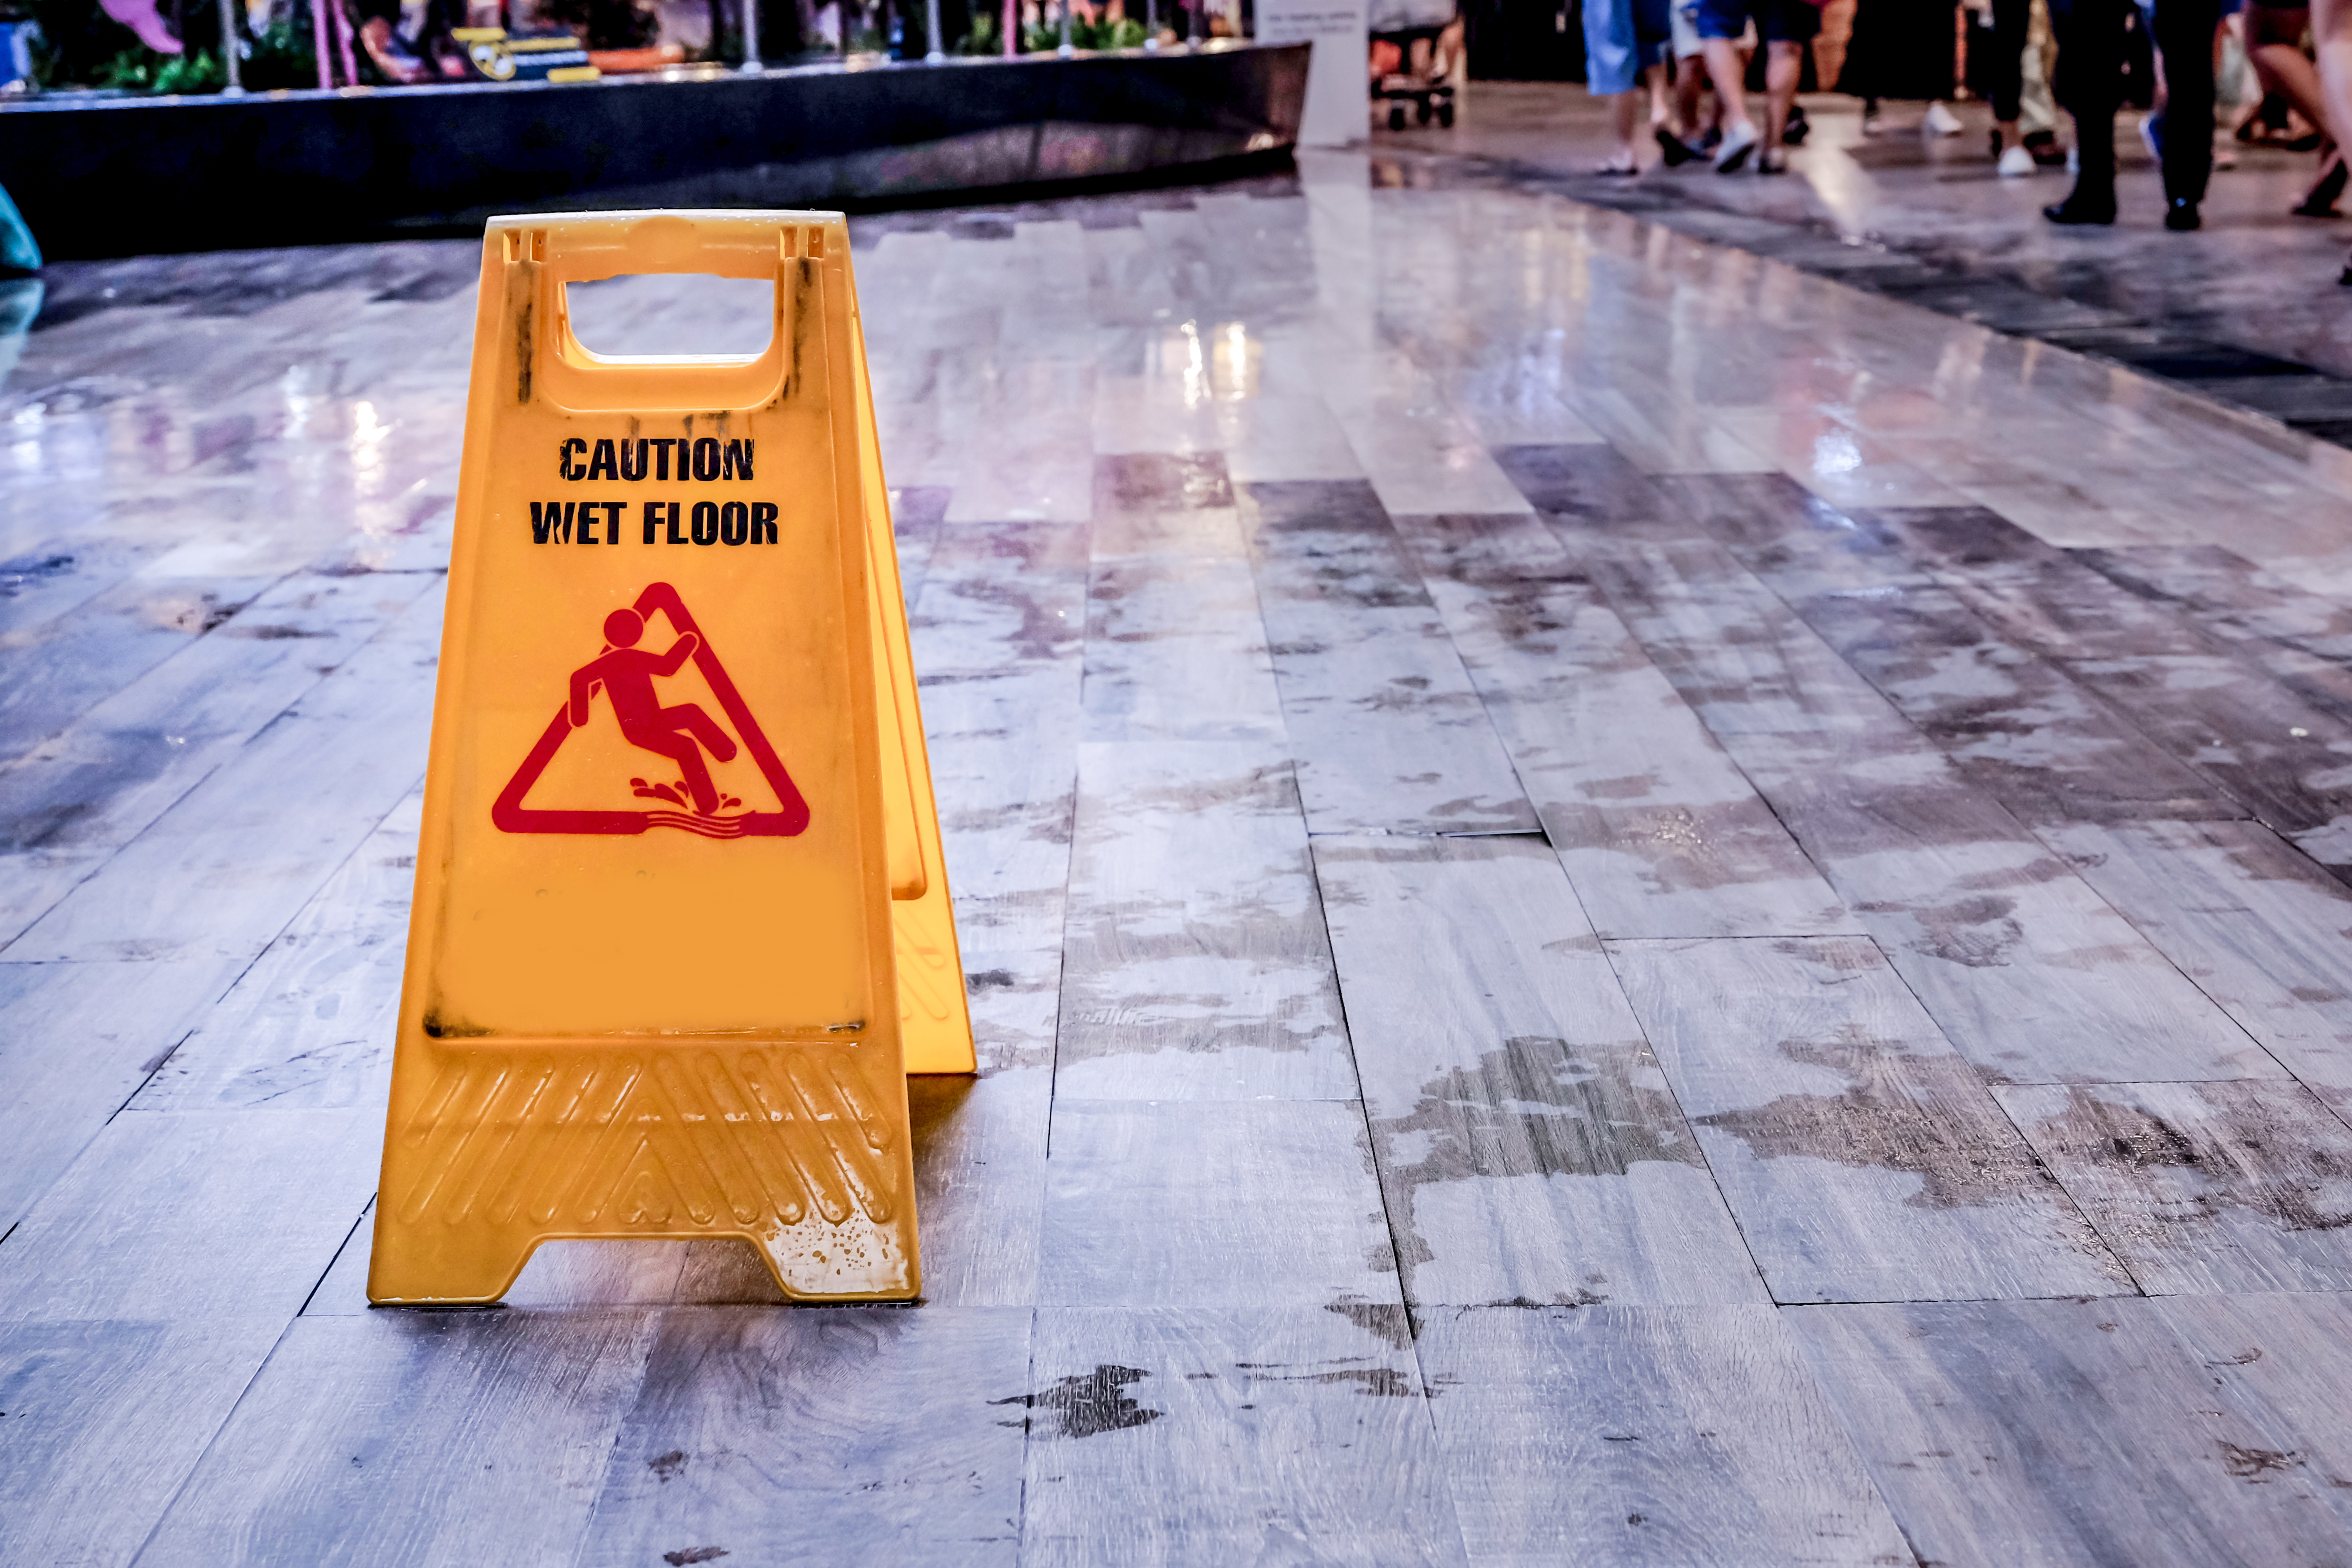 You slipped and fell on a puddle of water at a business establishment and tore your ACL – is the establishment liable for your injuries?